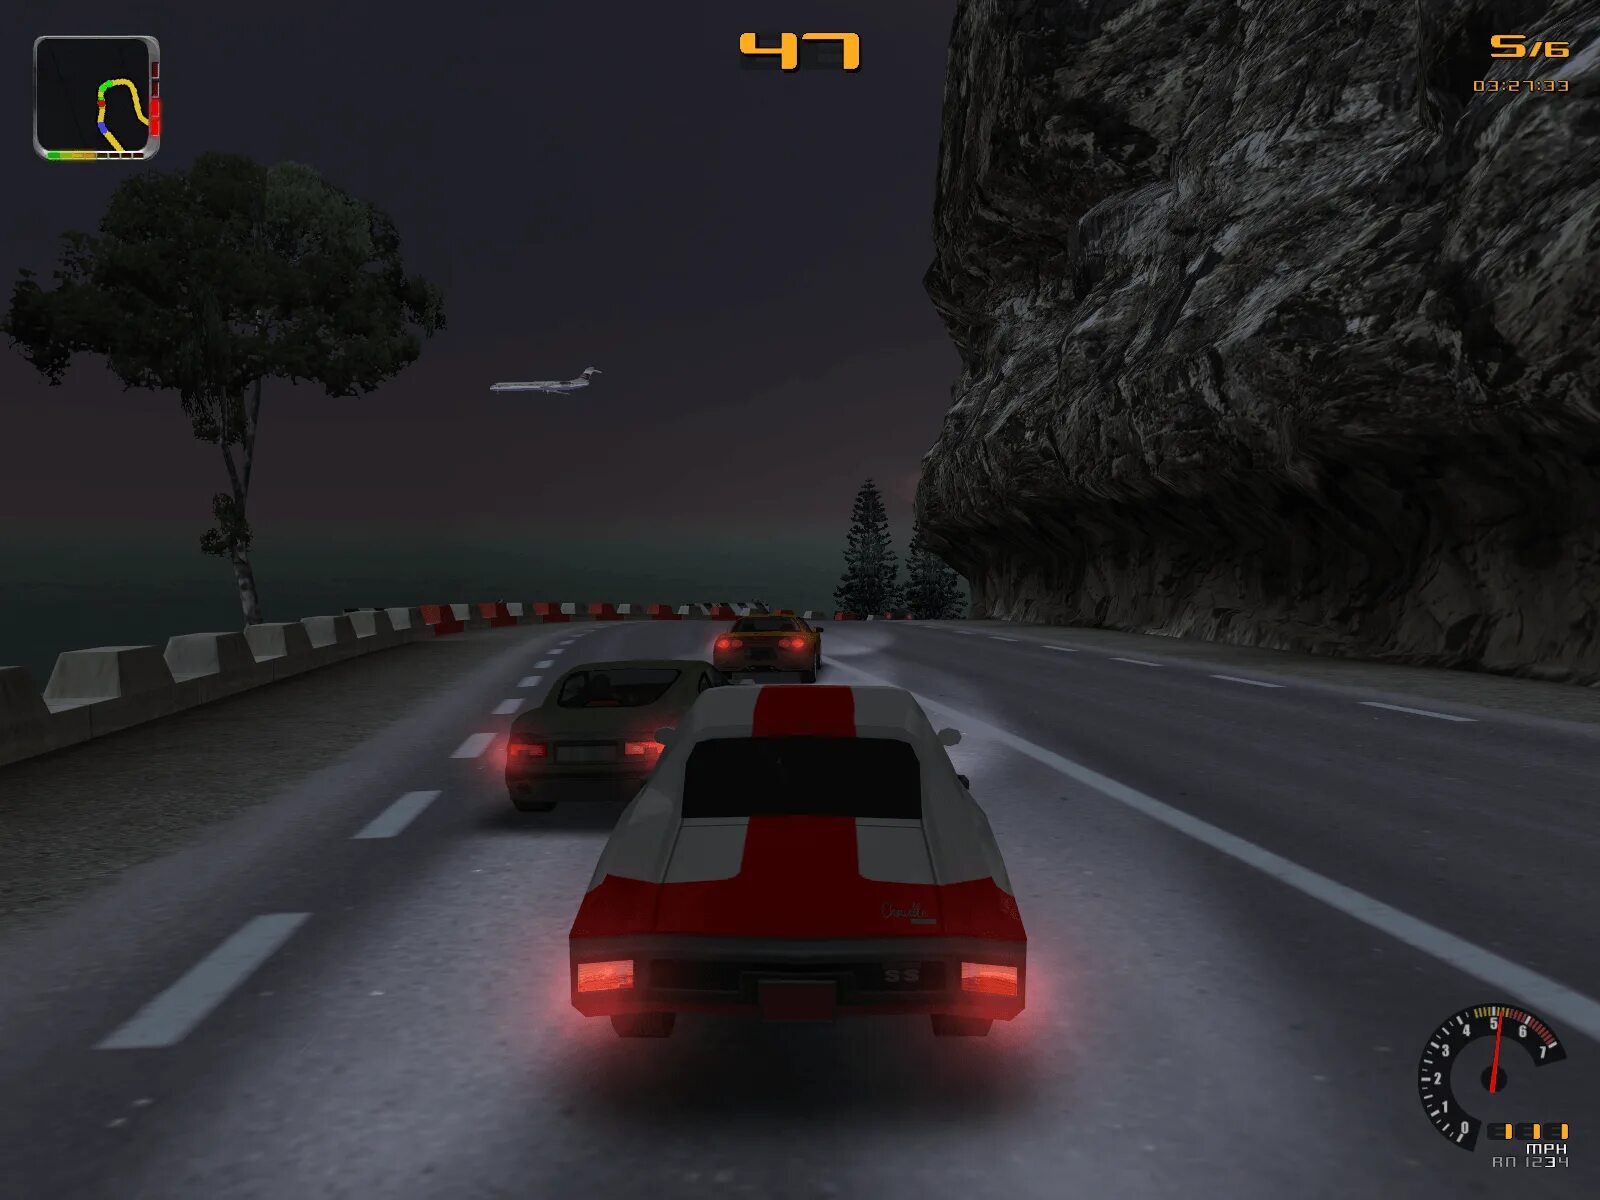 Test Drive игра 2002. Test Drive 2002 ps2. Test Drive Overdrive: the Brotherhood of Speed. Test Drive игра 2004. X game driver